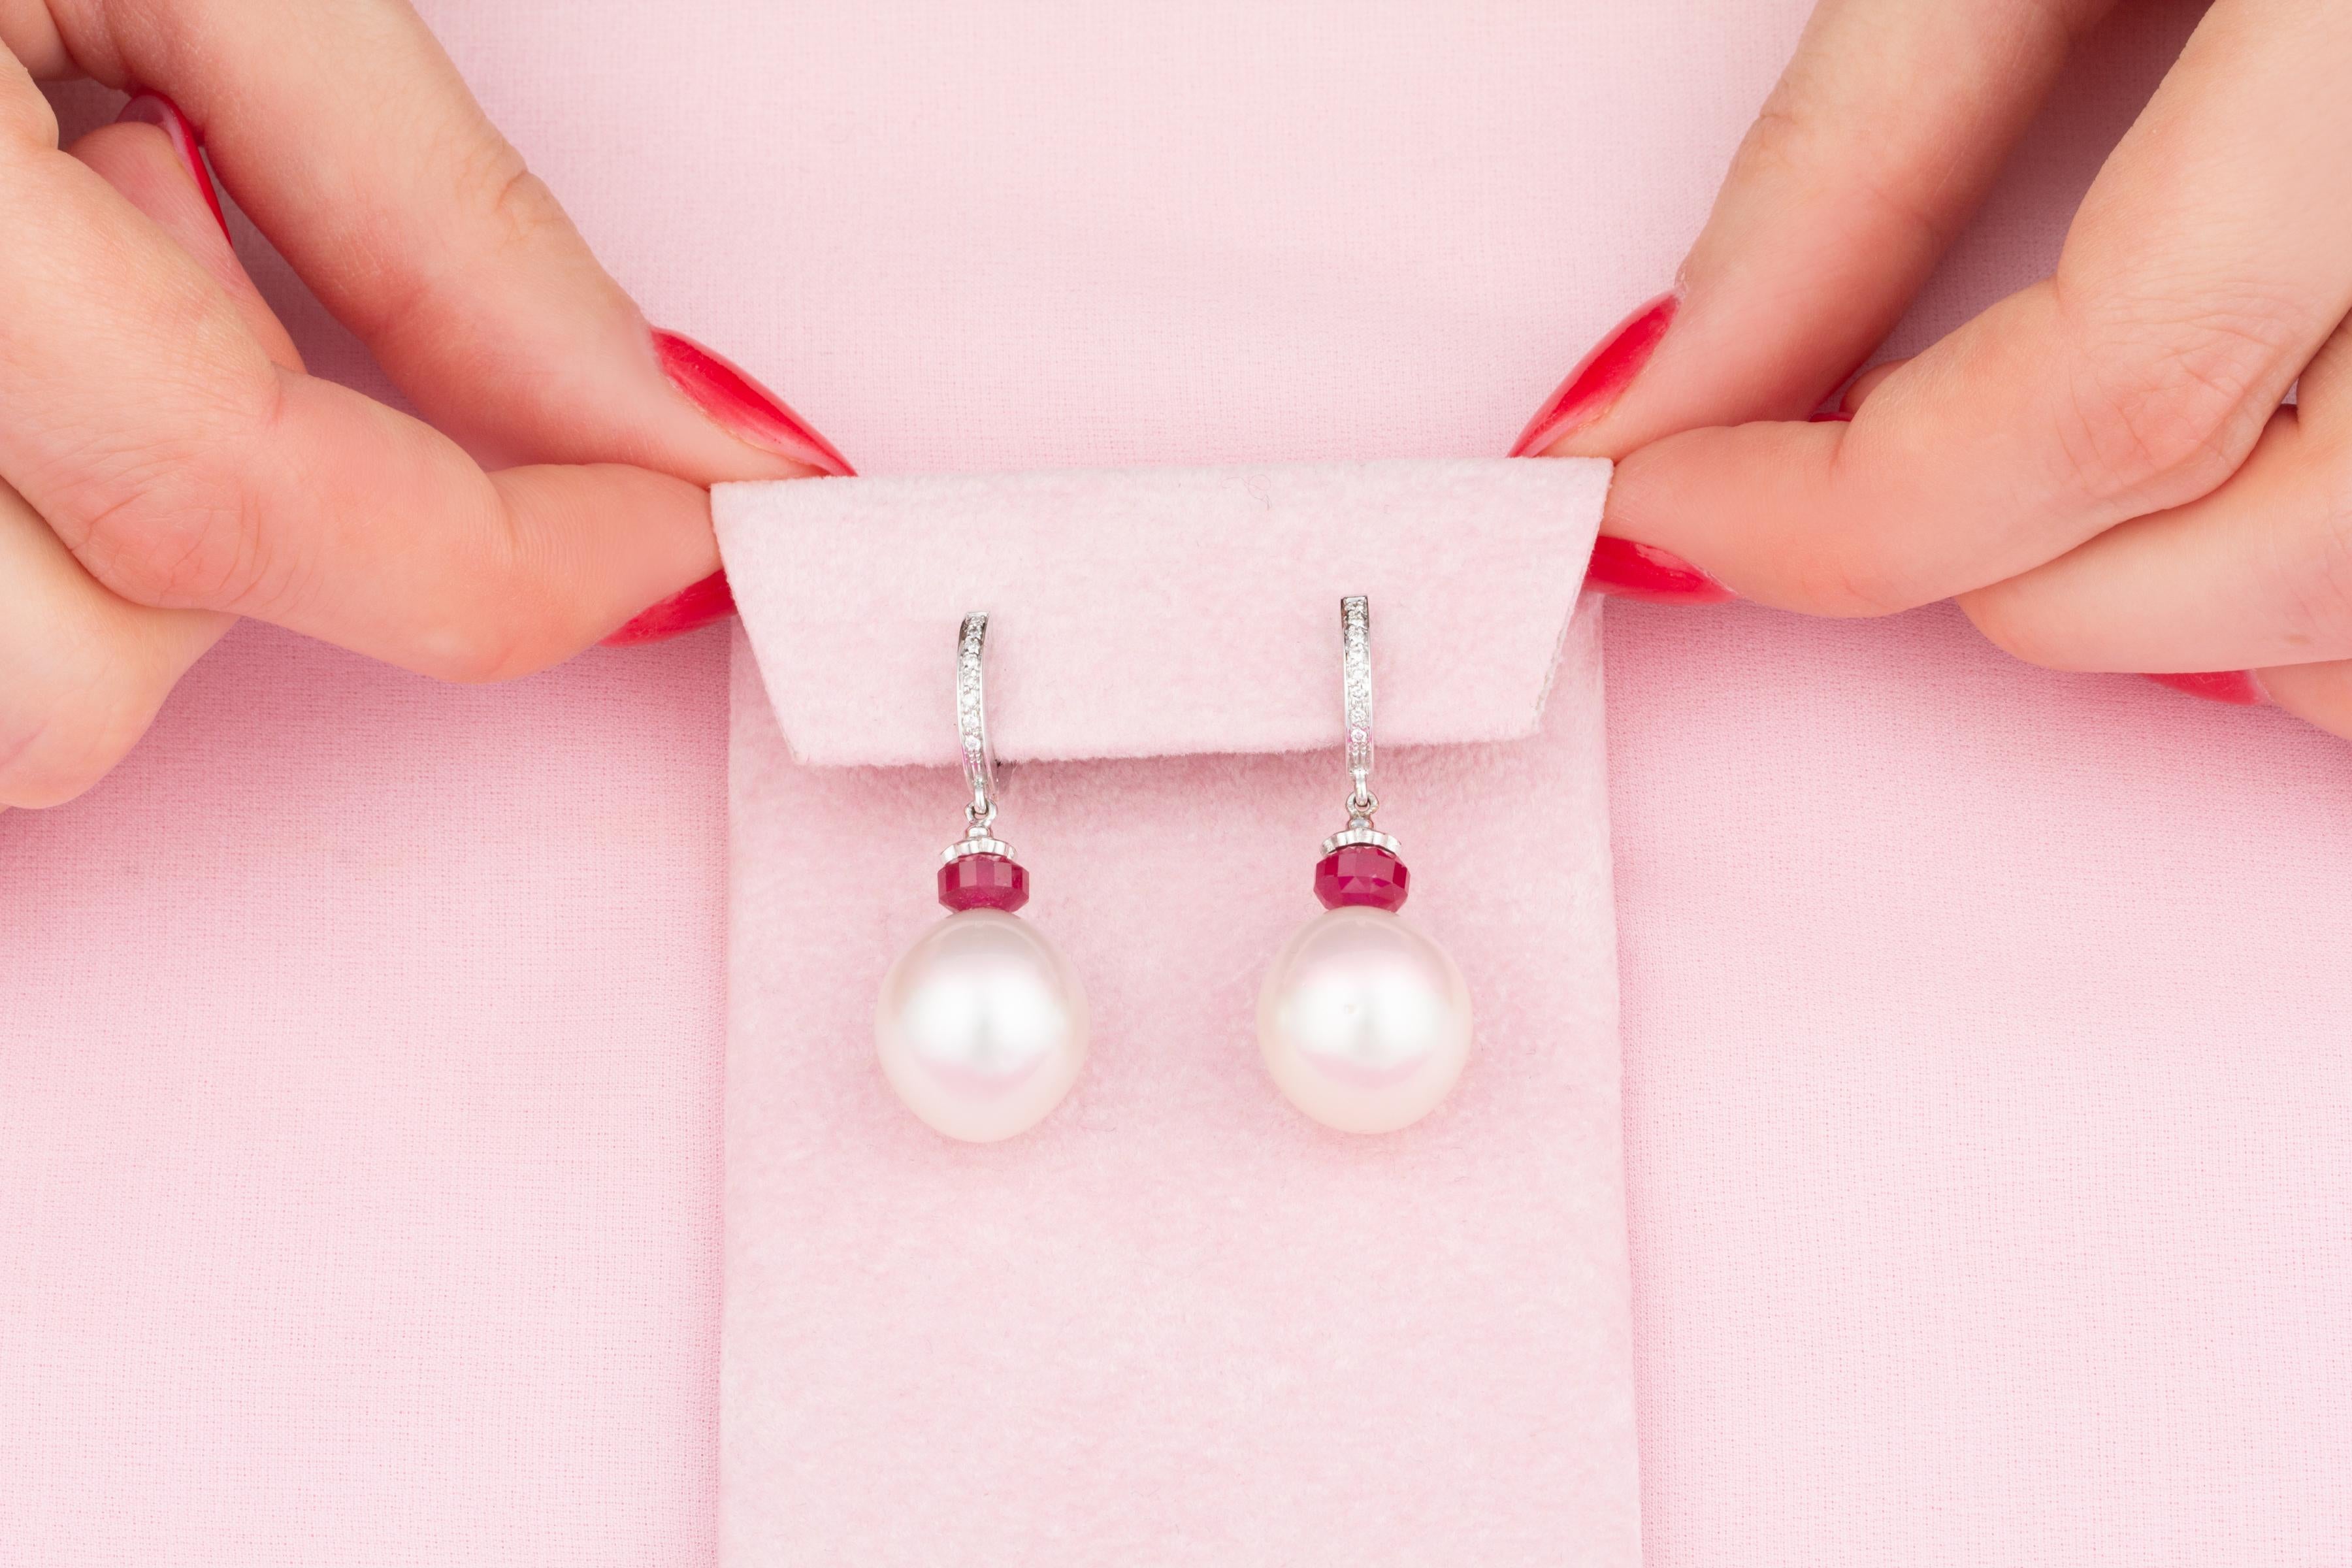 The South Sea pearl and diamond drop earrings feature two 15.5 x 14mm pearls of fine quality nacre and beautiful lustre.
The pearls are suspended from 2 hoops set with round diamonds of top quality (F/G-VVS1), via 2 decorative faceted ruby rings.